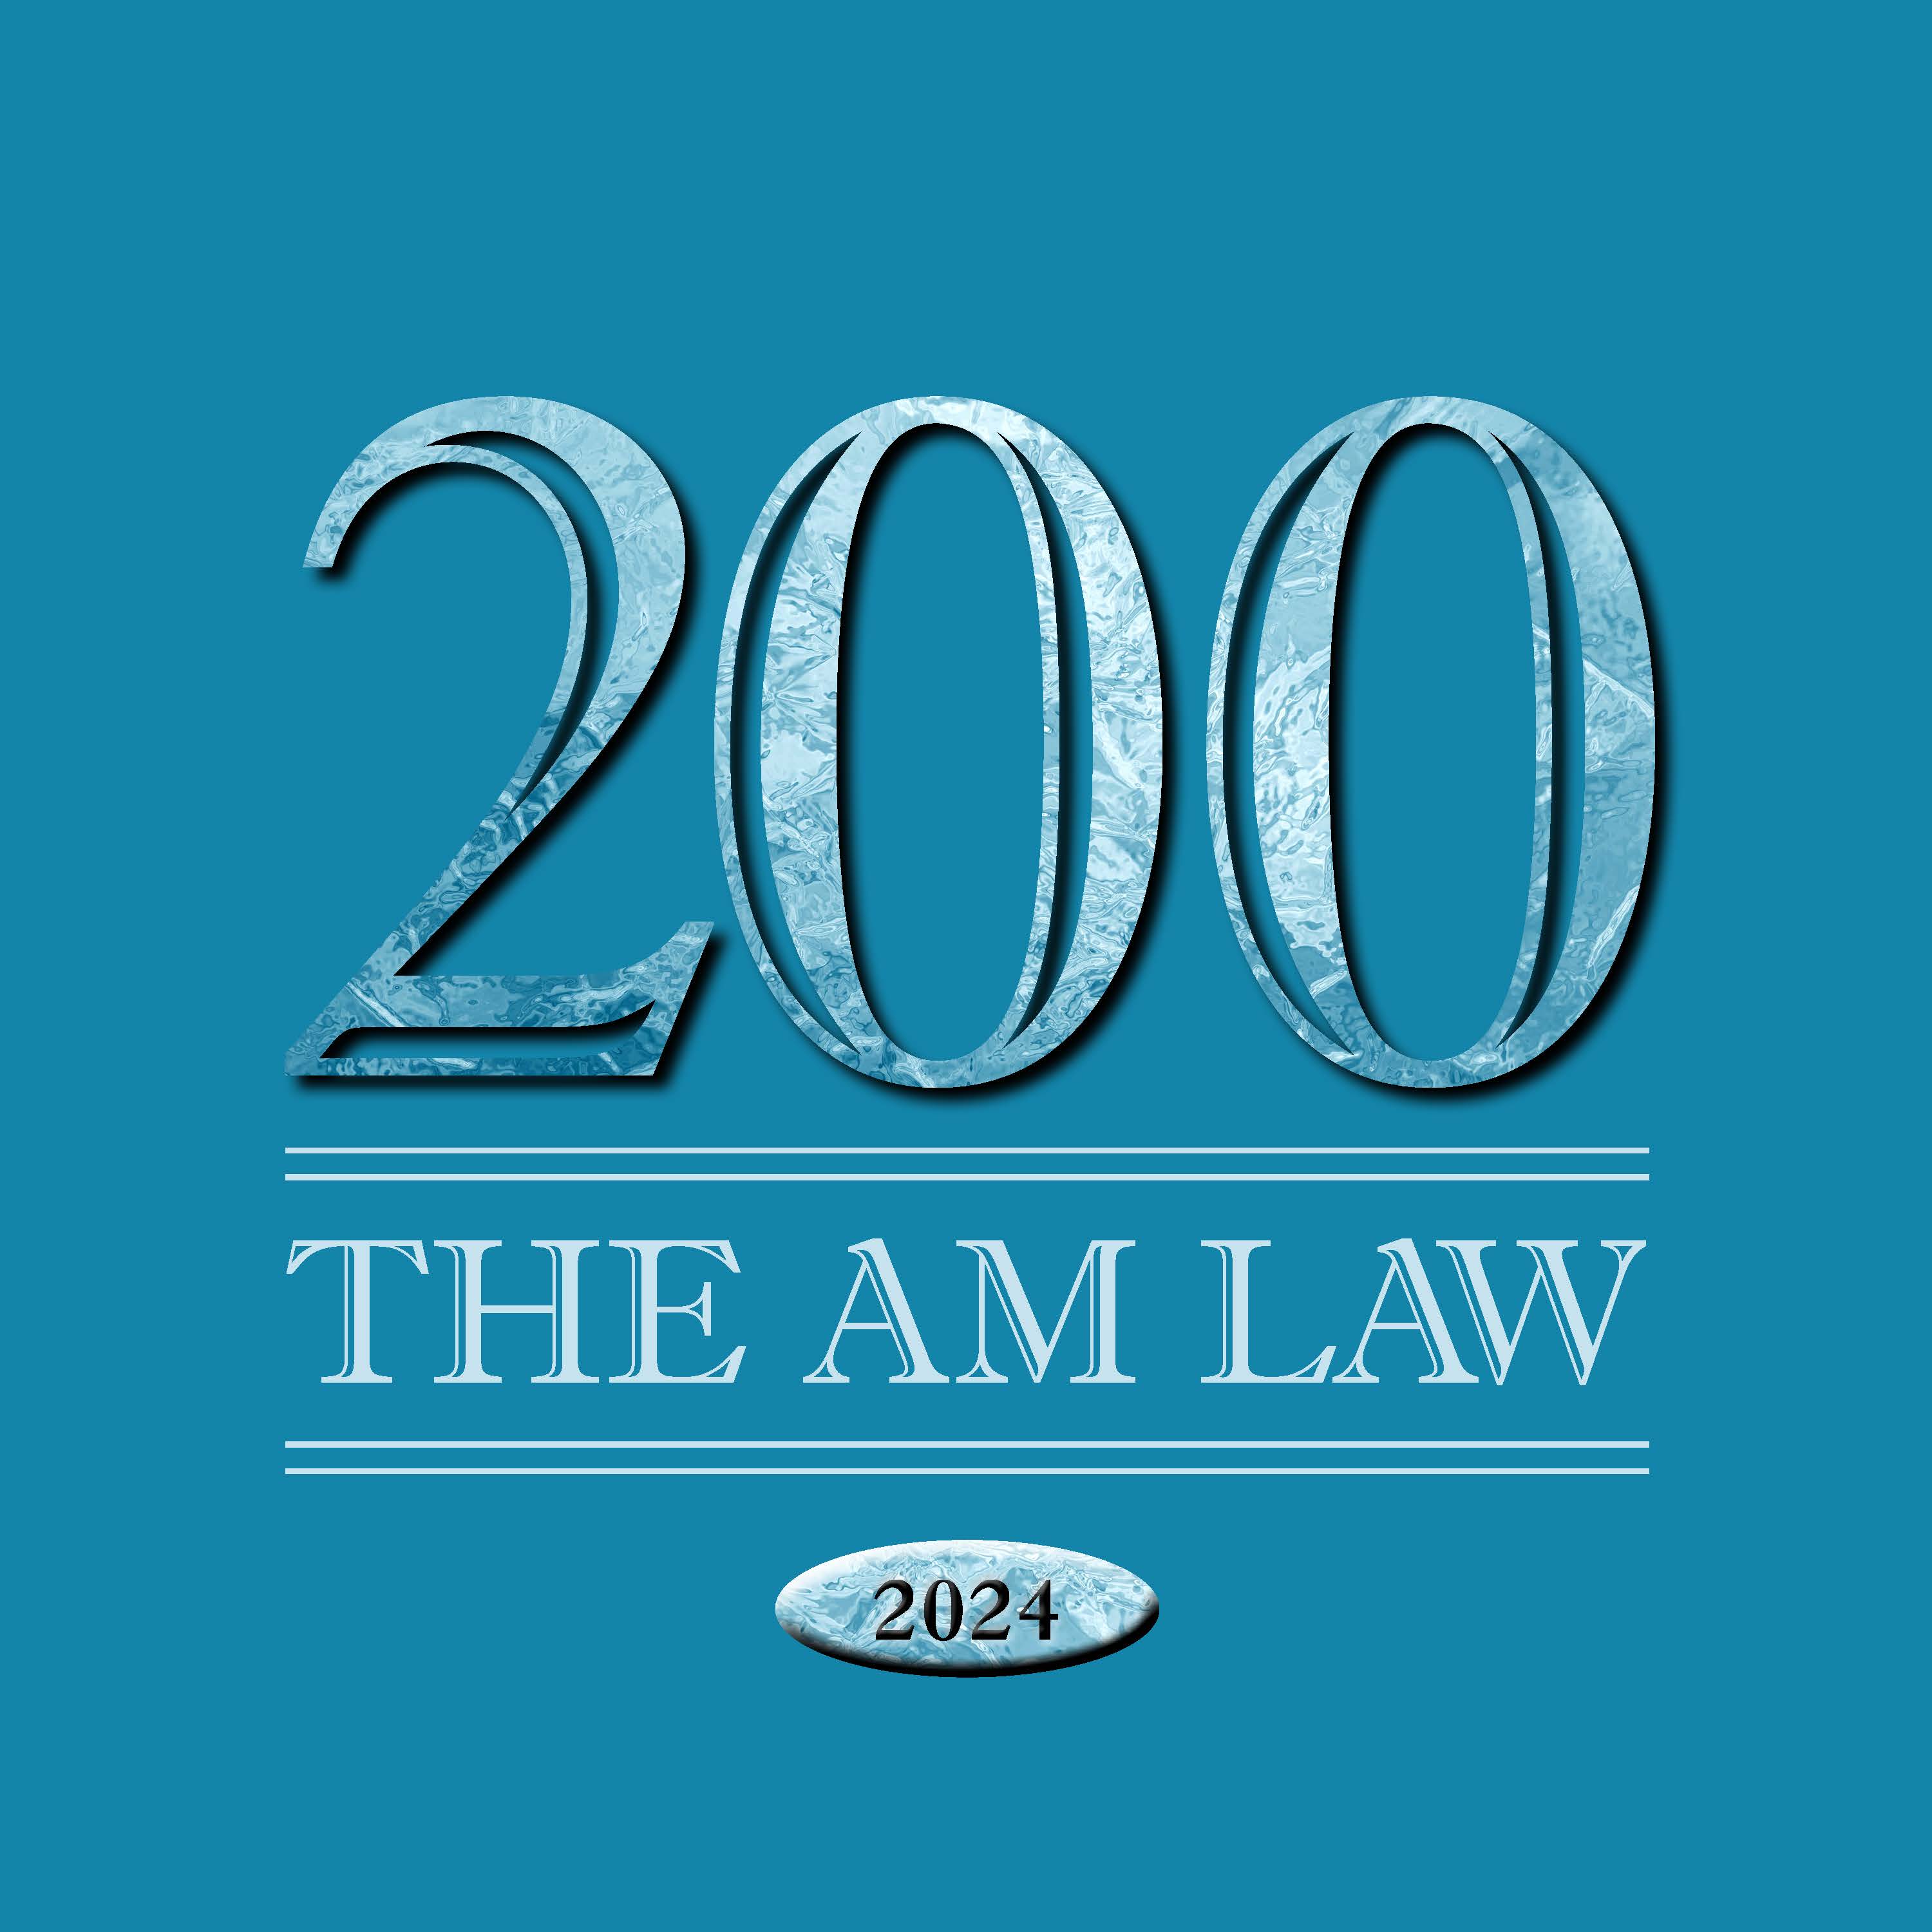 How Have The Second Hundred Firms Fared Since Outperforming the Am Law 100 Last Year 